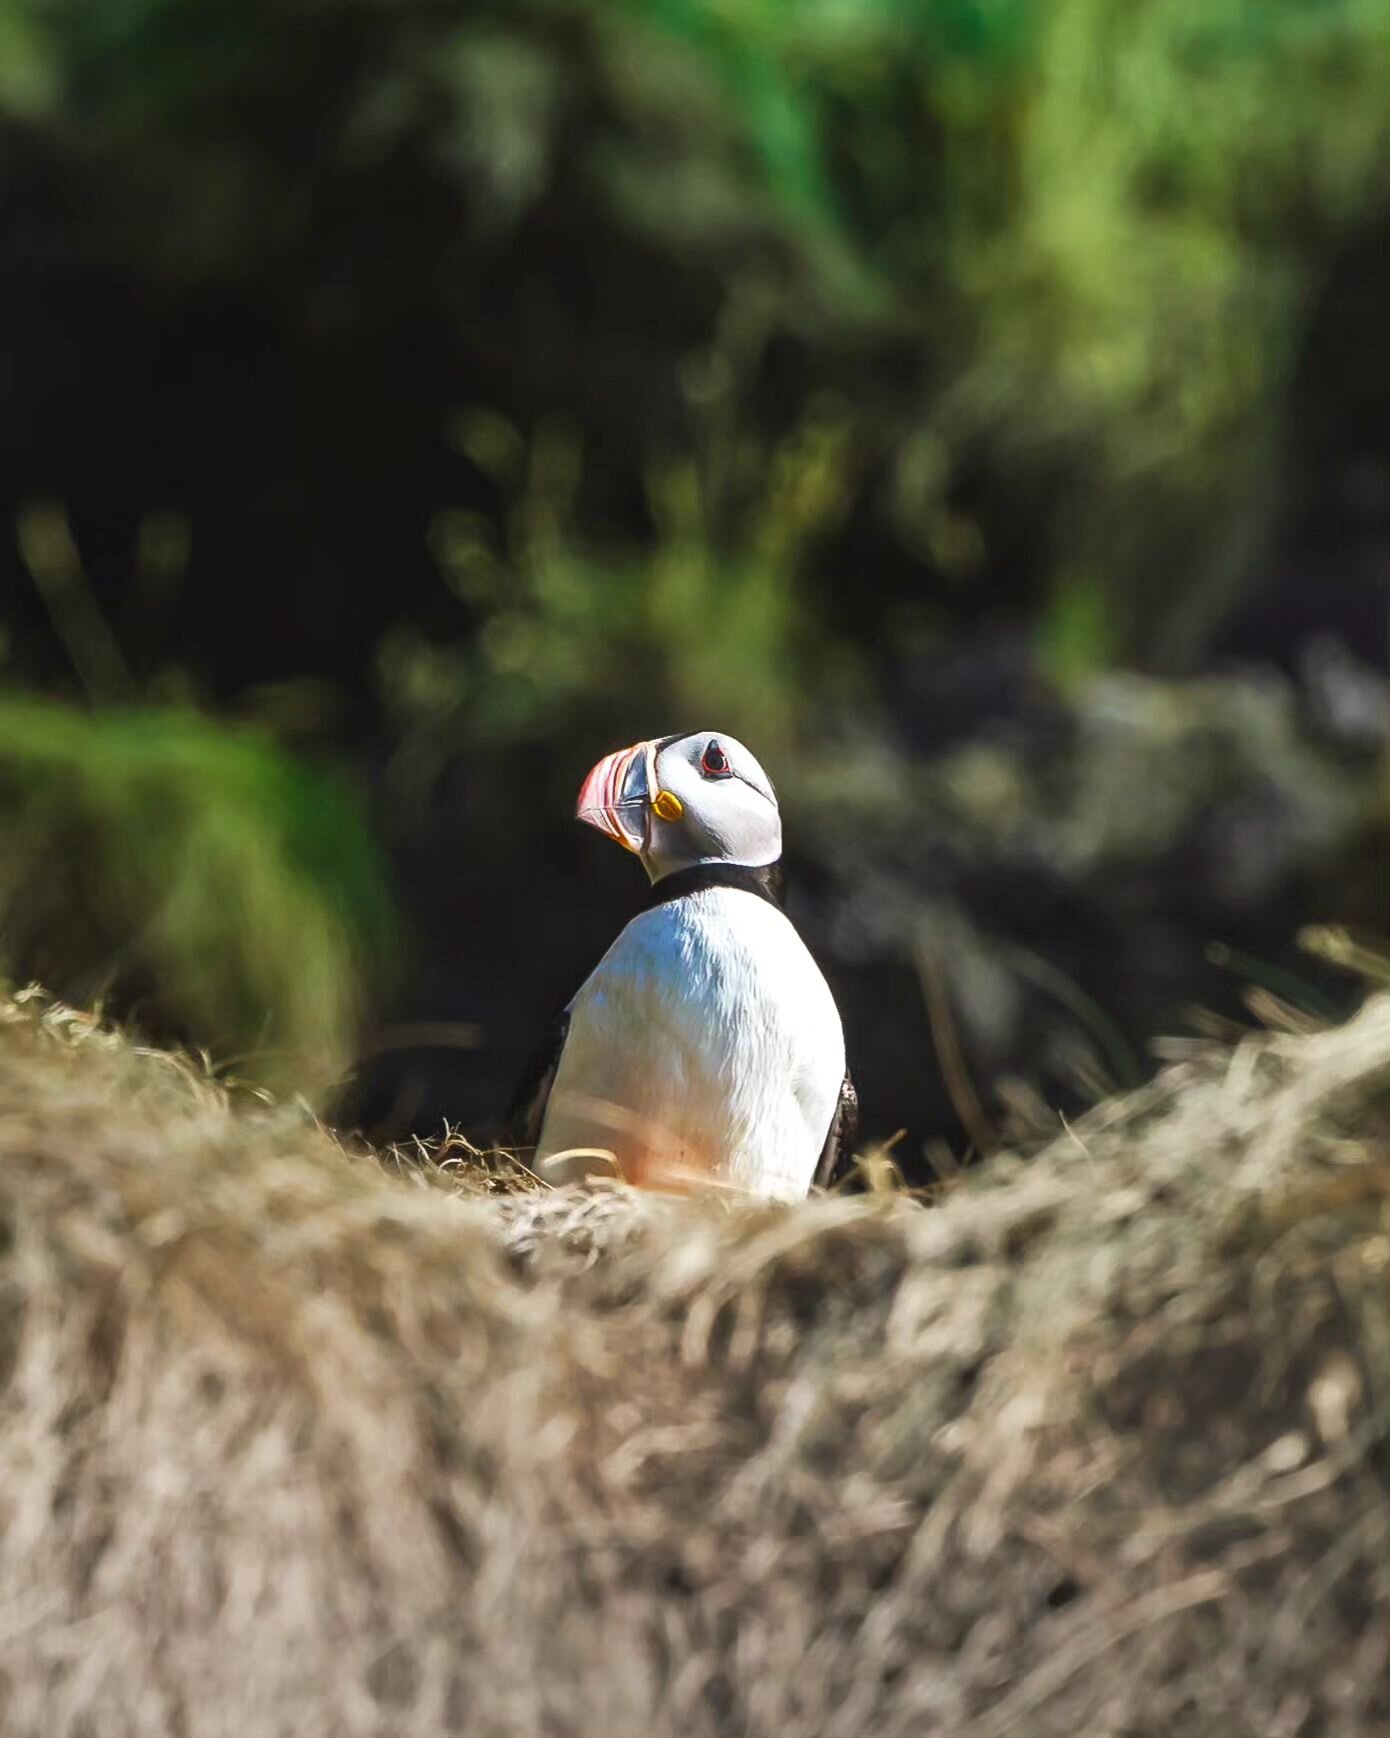 &bull; Locking eyes 👁️ I'm not much of a bird spotter but Puffins really do steal the show 😍⁠
⁠
👉🏻 Everything about Iceland in one place #mitevisuals_iceland 🇮🇸⁠
⁠
🙋🏼&zwj;♂️ Follow @mitevisuals for more⁠
⁠
&bull;⁠
&bull;⁠
&bull;⁠
#puffin #bir